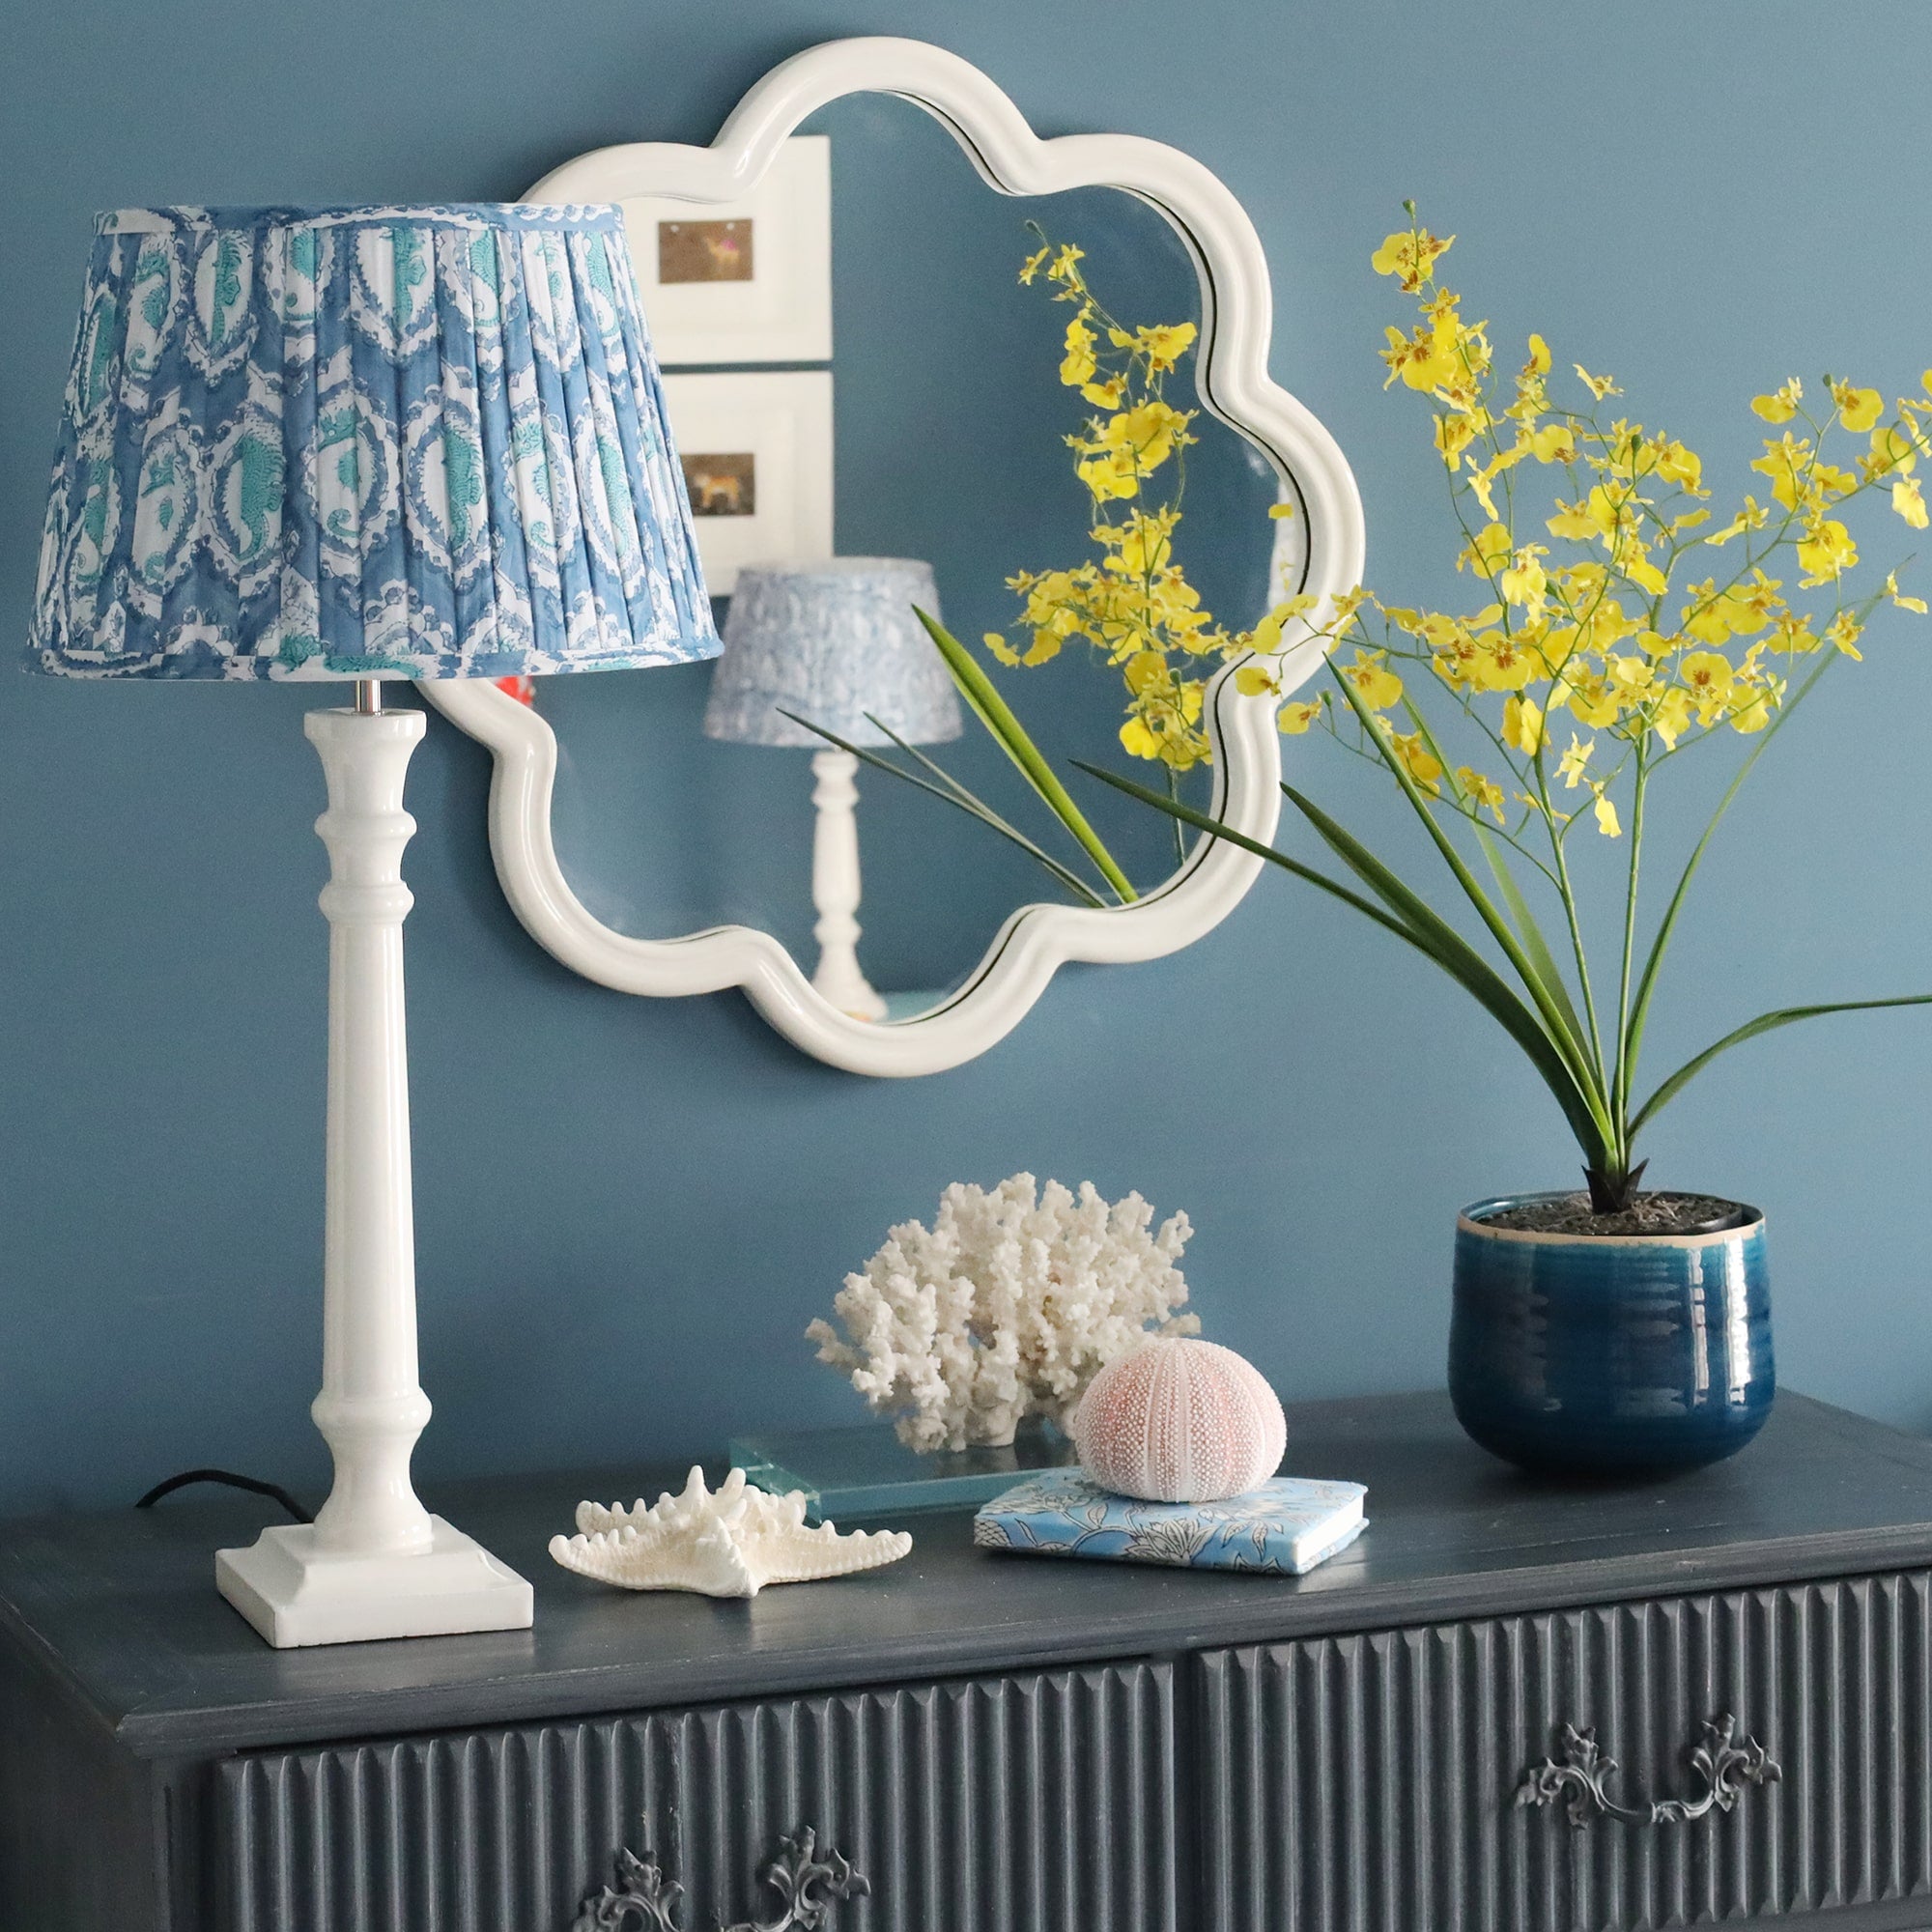 White Lacquer Godophin lampbase with a pleated lampshade on a sideboard.On the sideboard are several ceramic fruits,staionary, an orchid in a pot and a starfish.Behind on the wall is a wave mirror